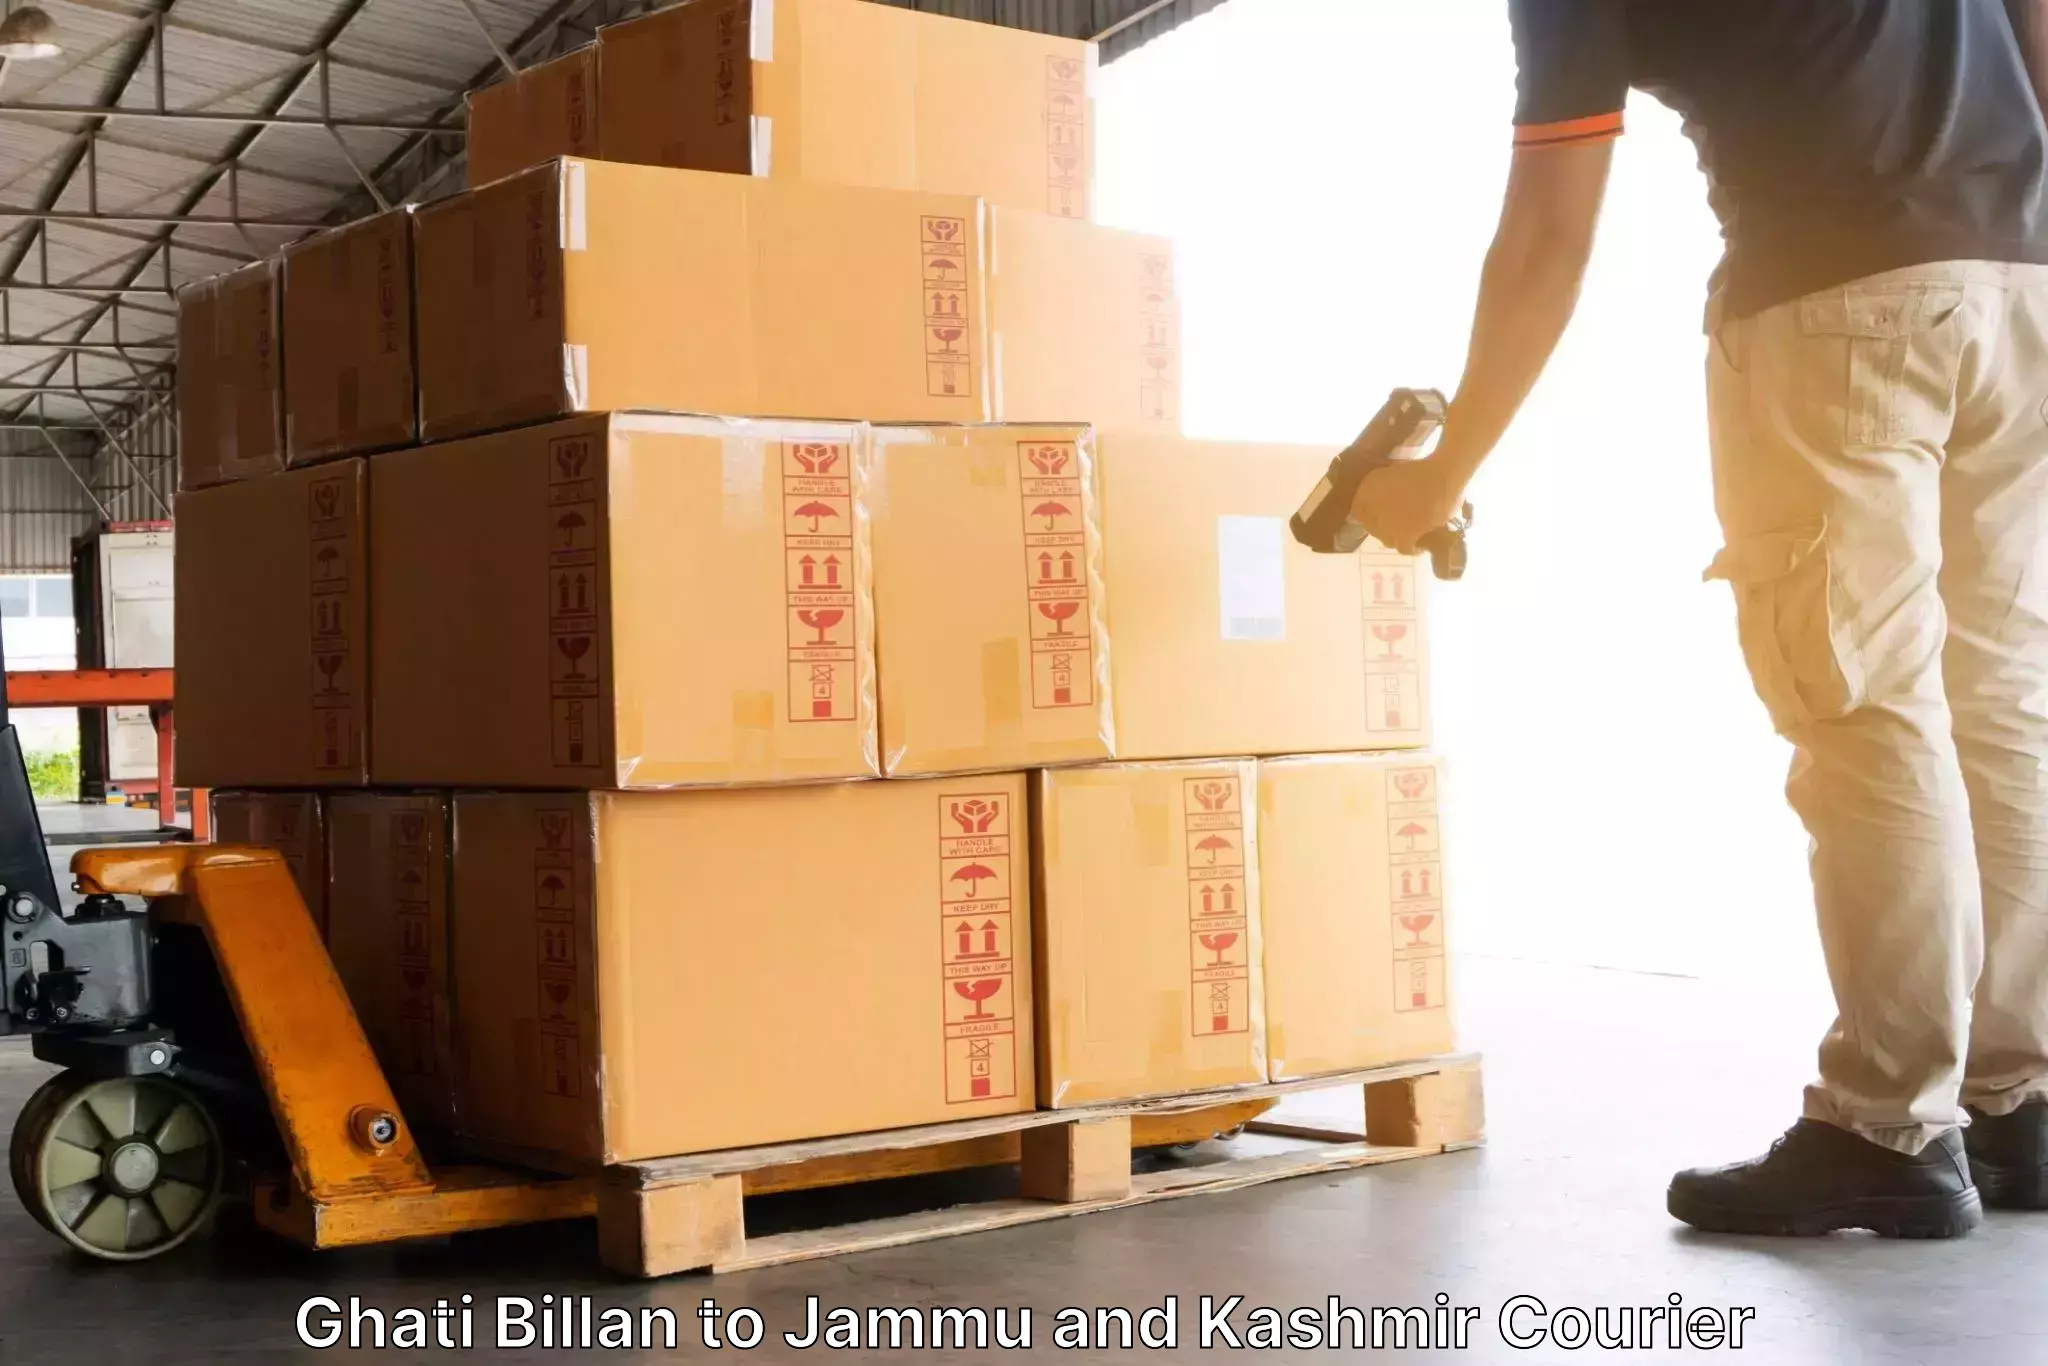 Multi-national courier services Ghati Billan to Chenani